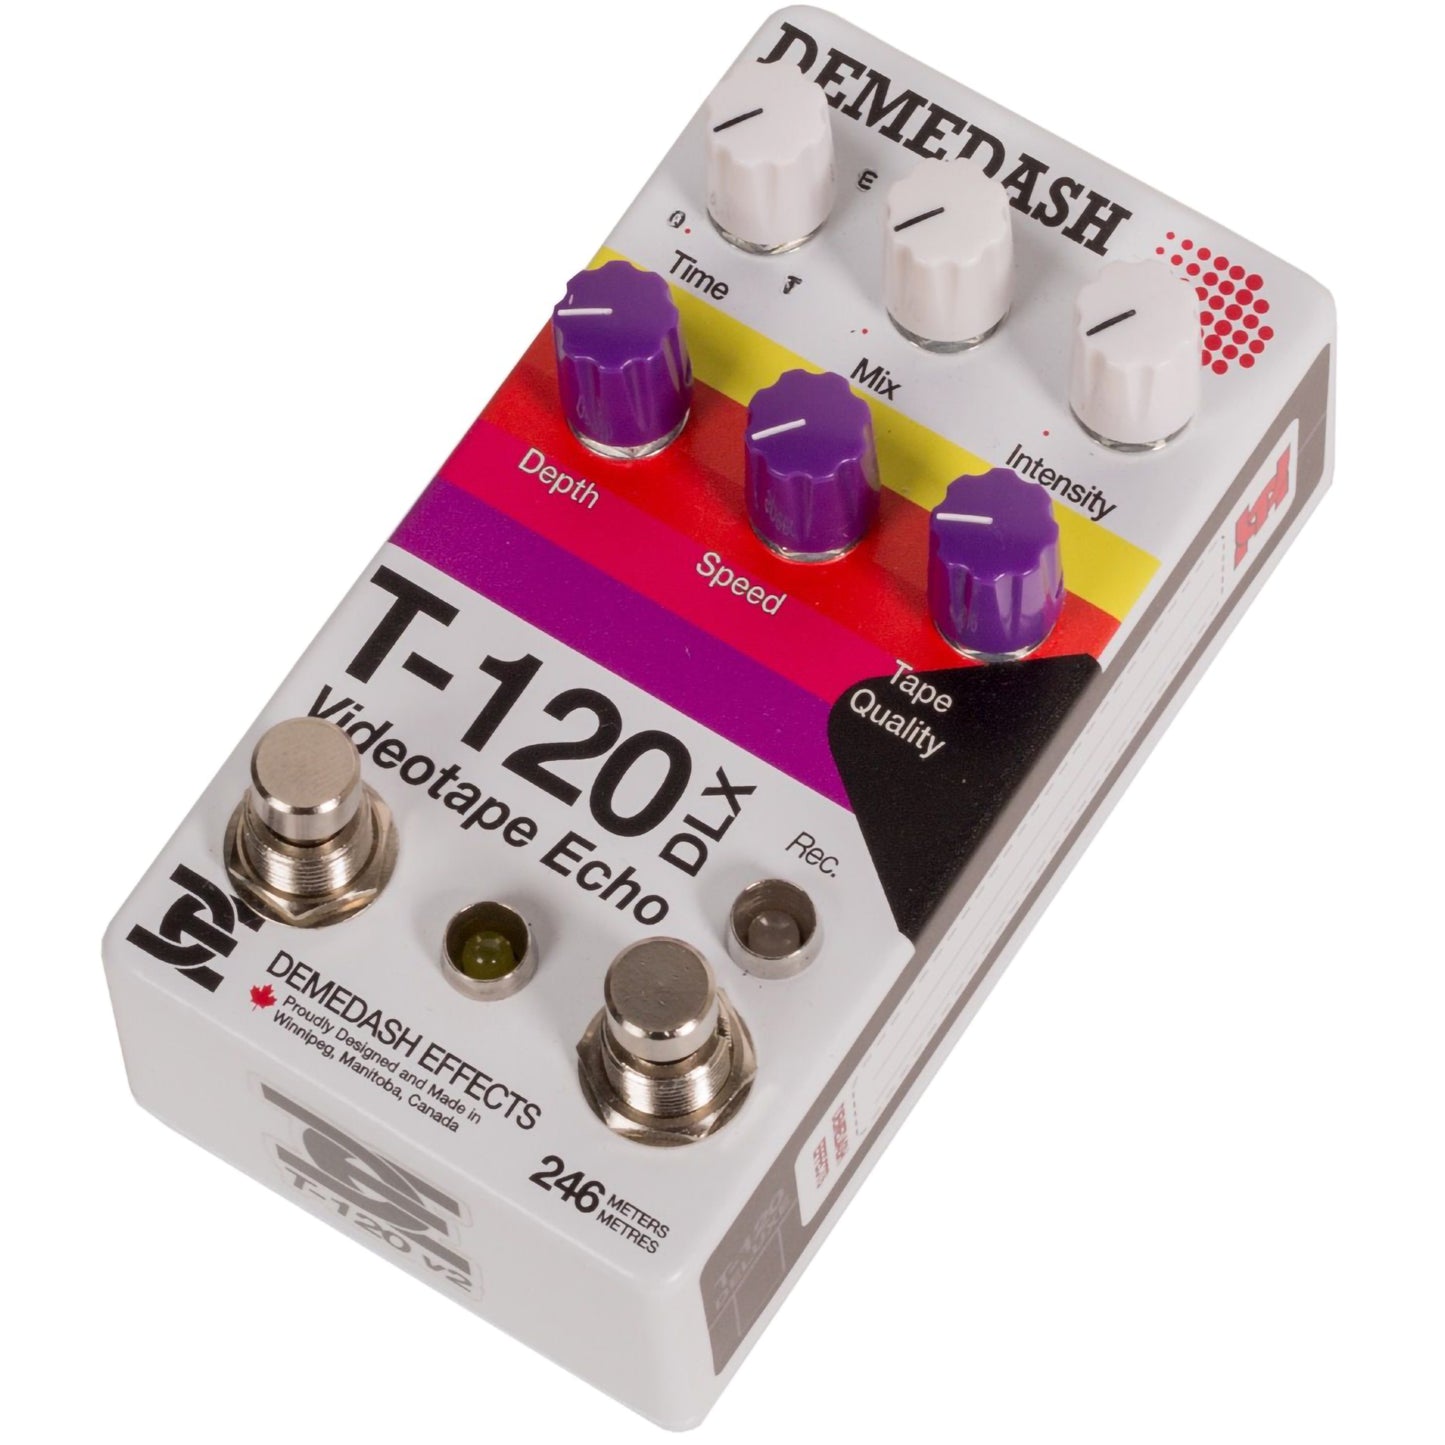 Demadash Effects T-120 Deluxe V2 Pedal